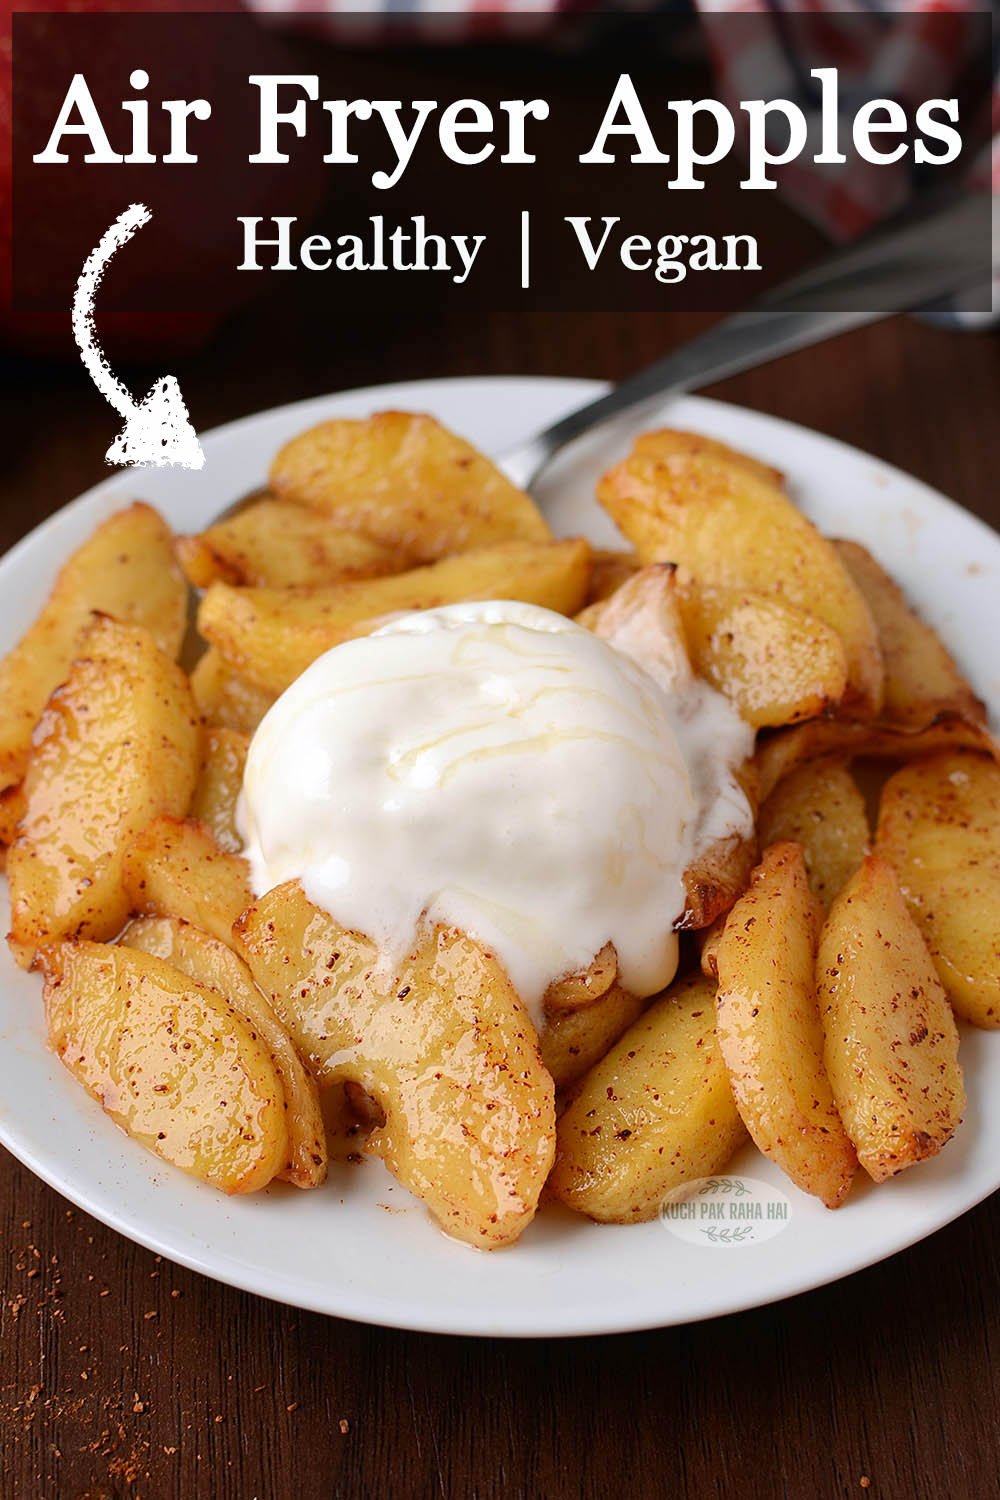 Air fryer apples healthy without refined sugar.